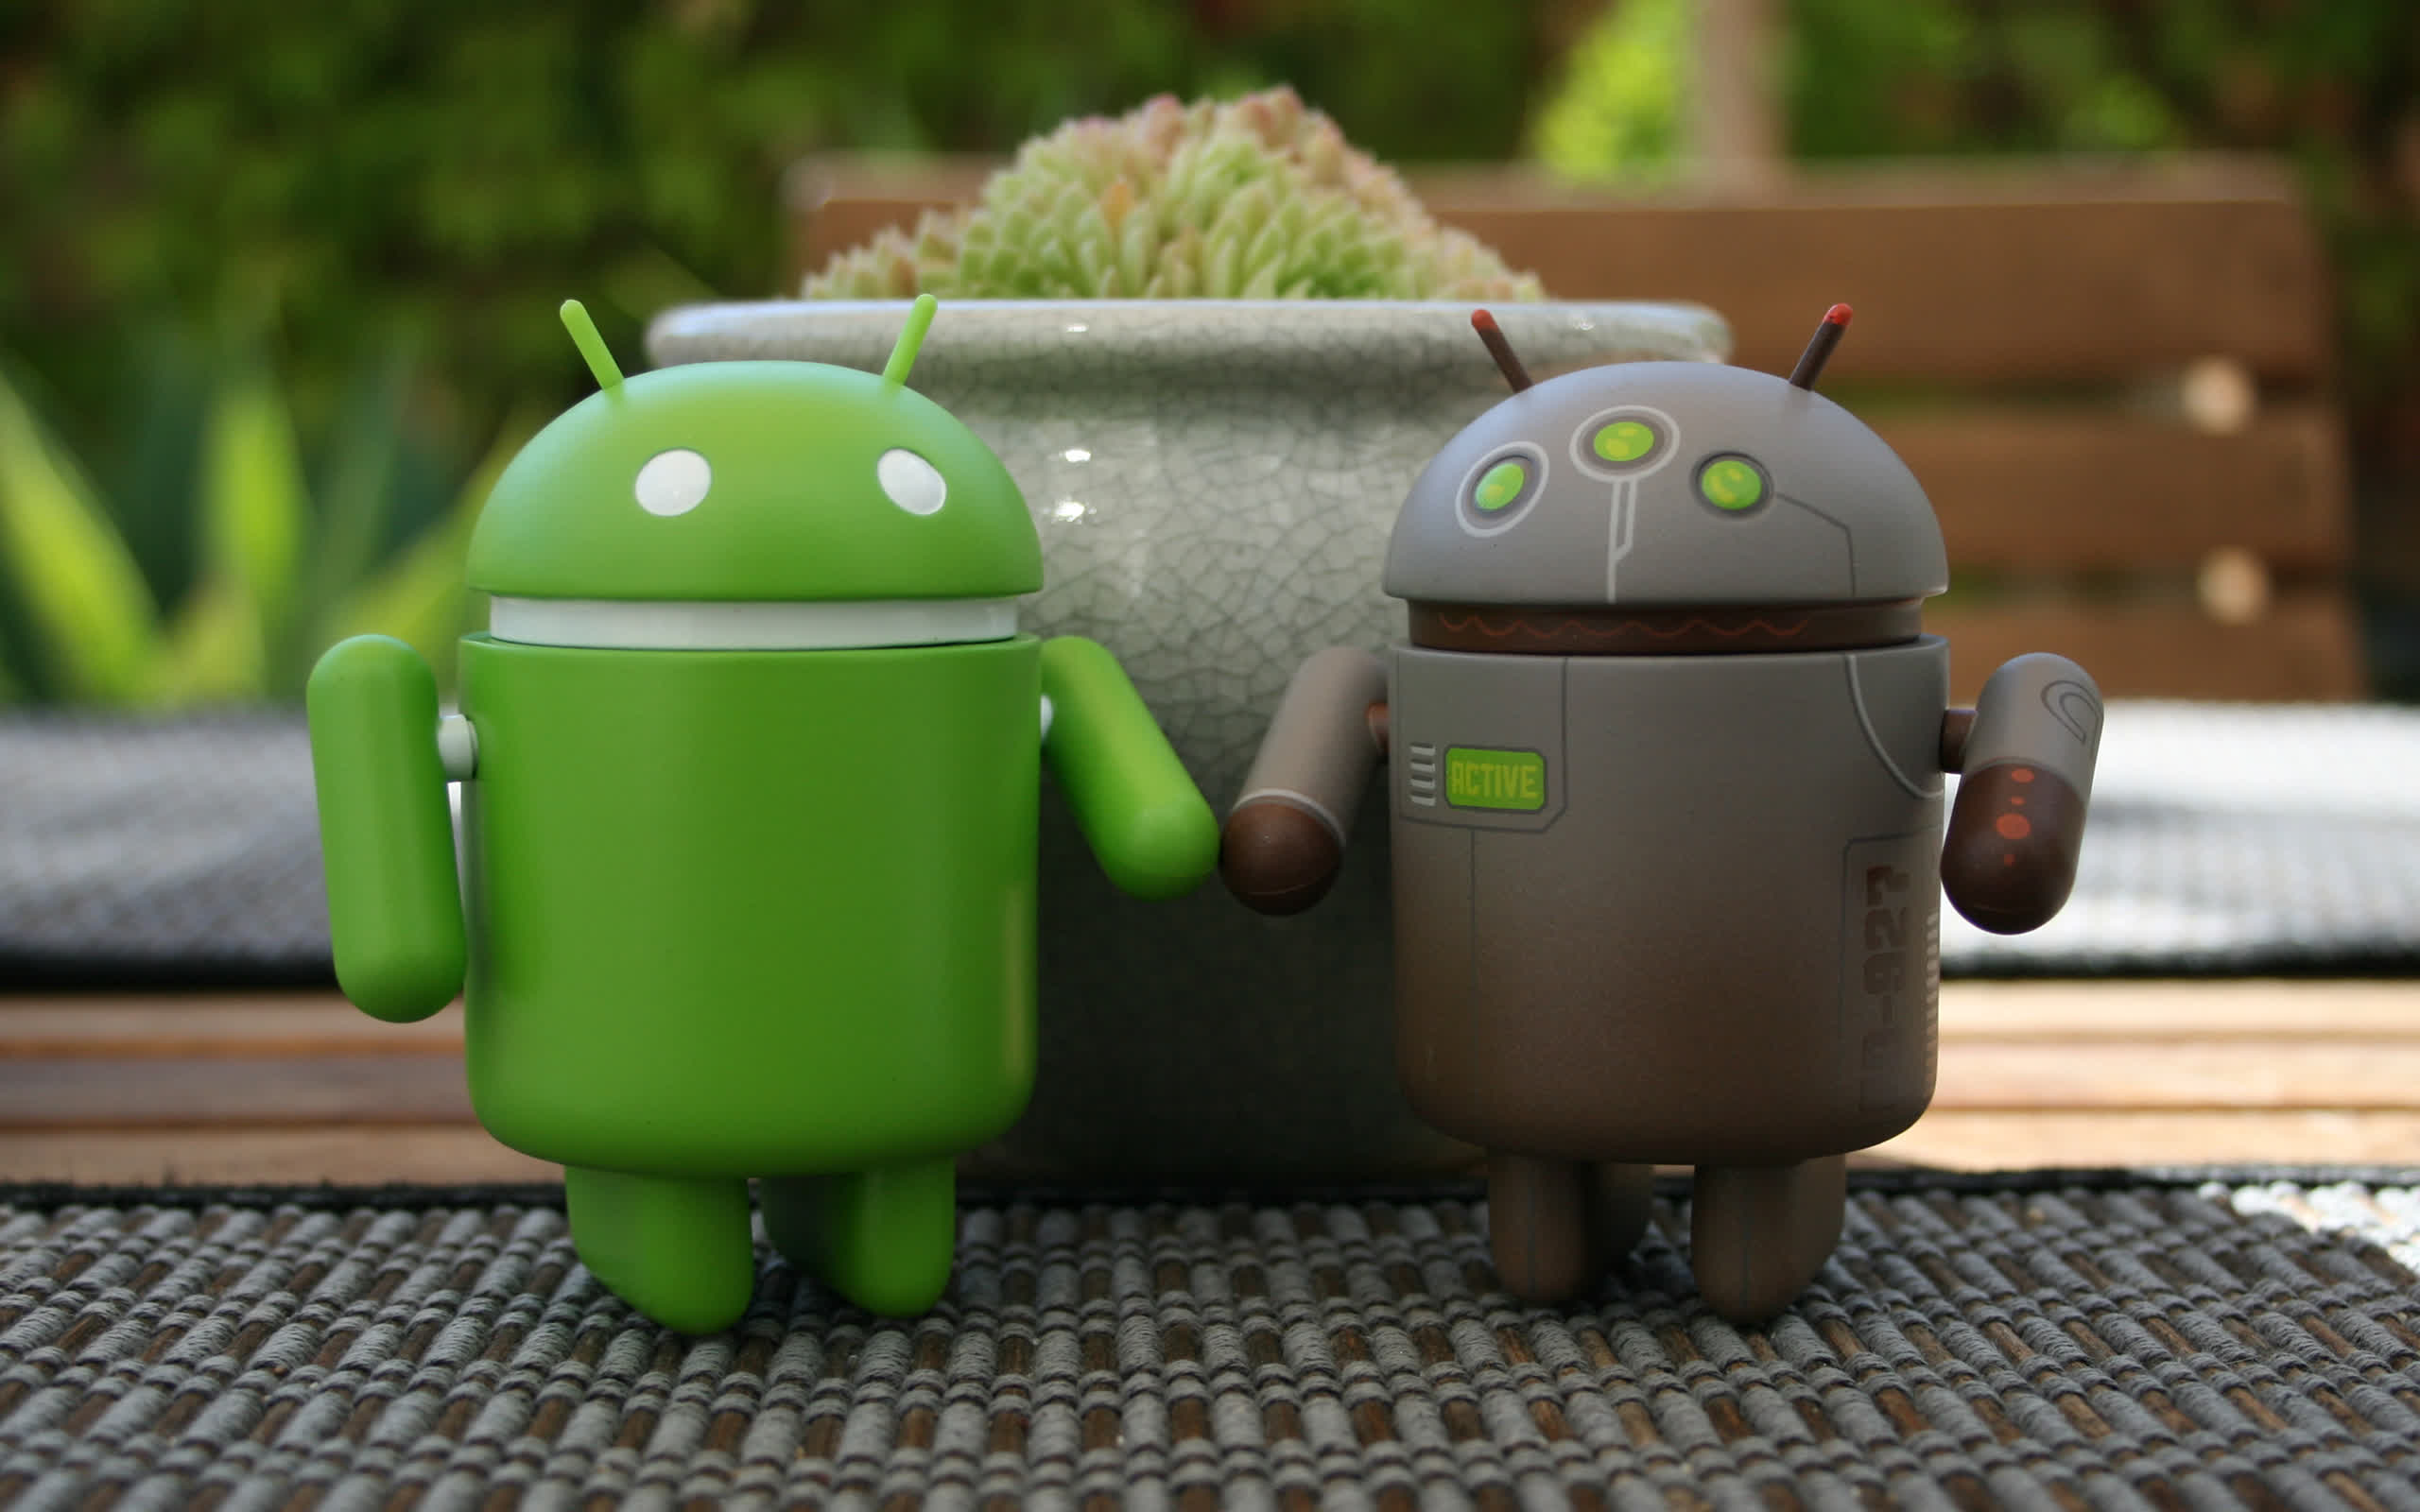 Google wants to fight pre-installed Android malware